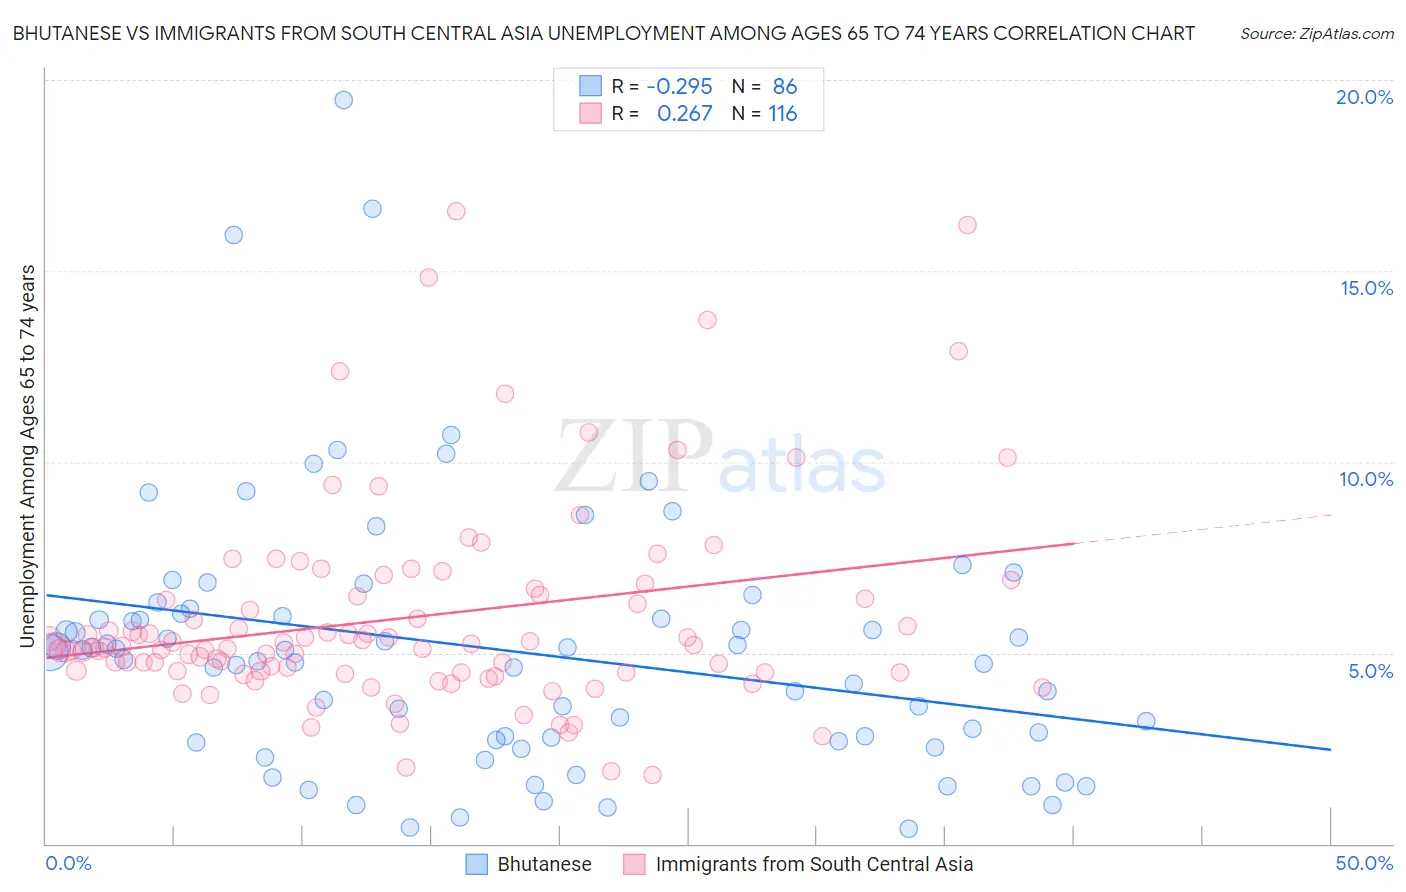 Bhutanese vs Immigrants from South Central Asia Unemployment Among Ages 65 to 74 years